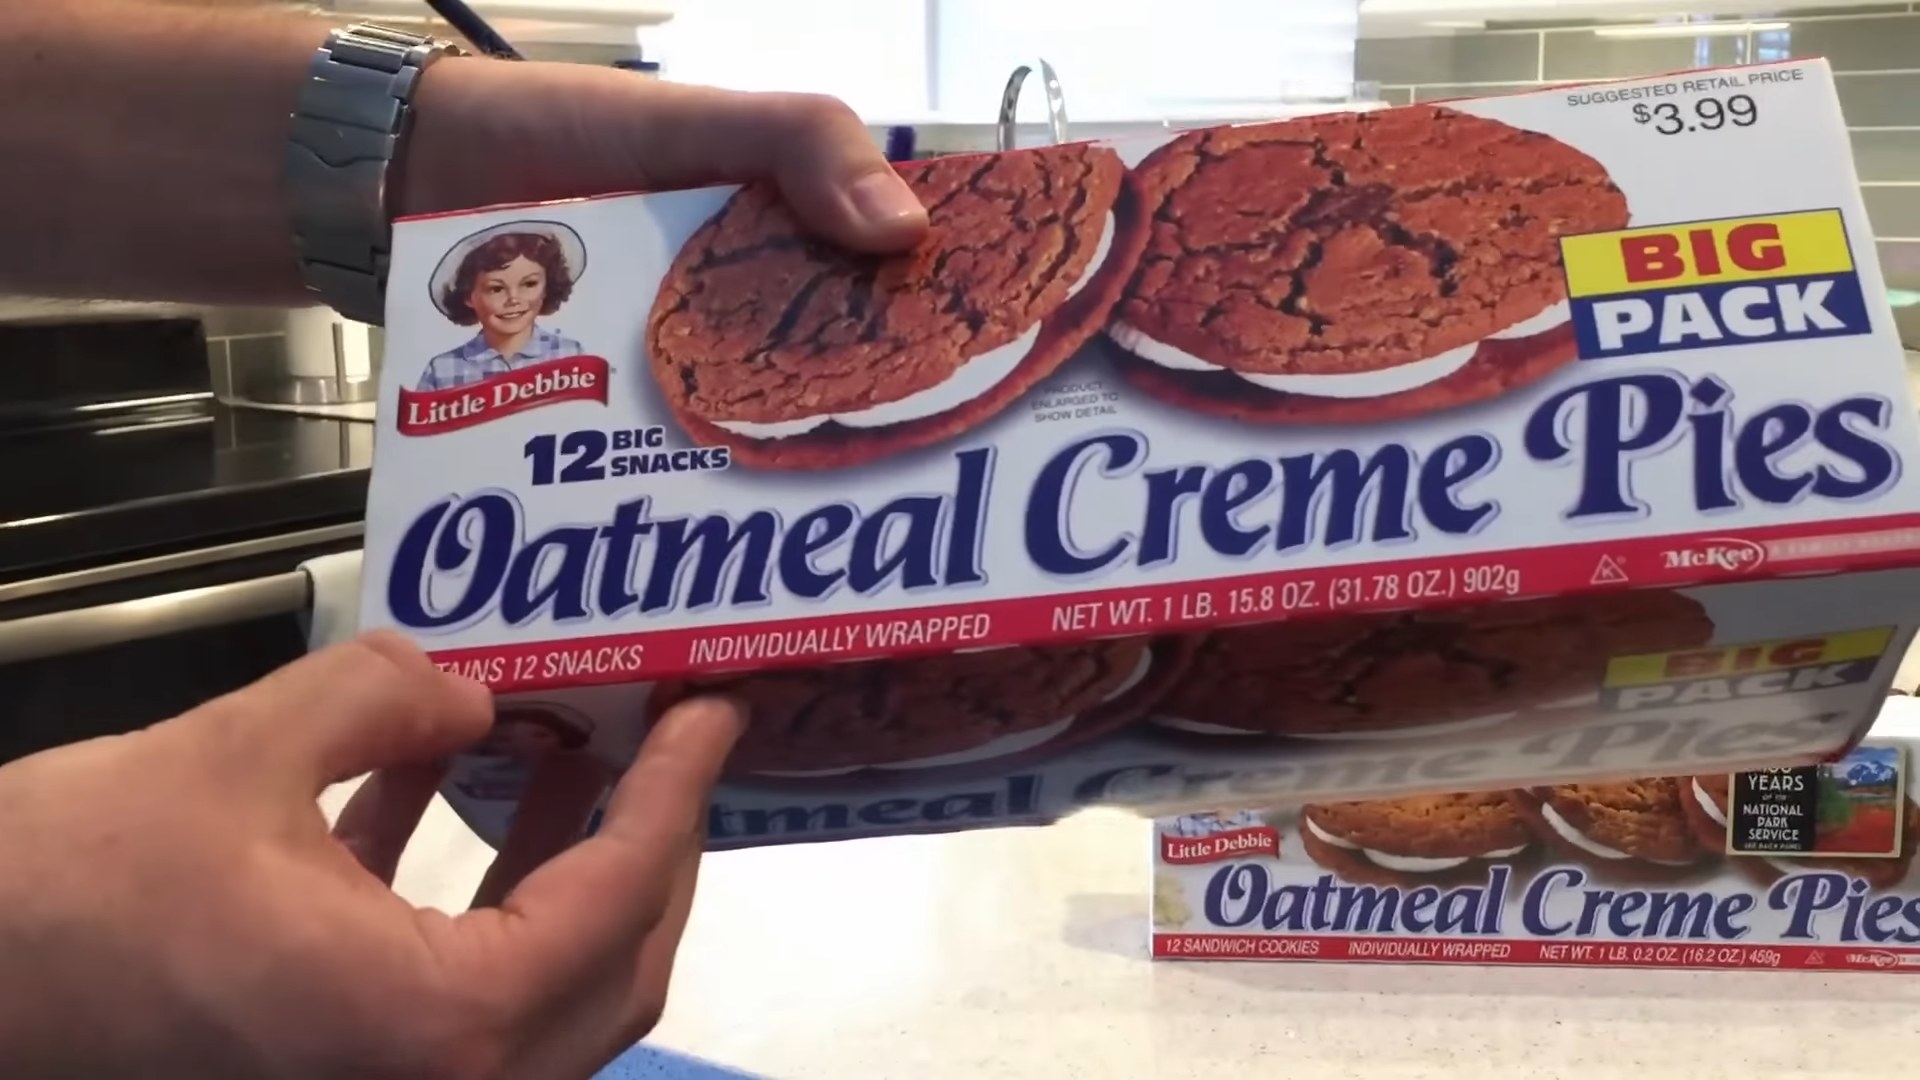 Man holding box of Little Debbie Oatmeal Creme Pies